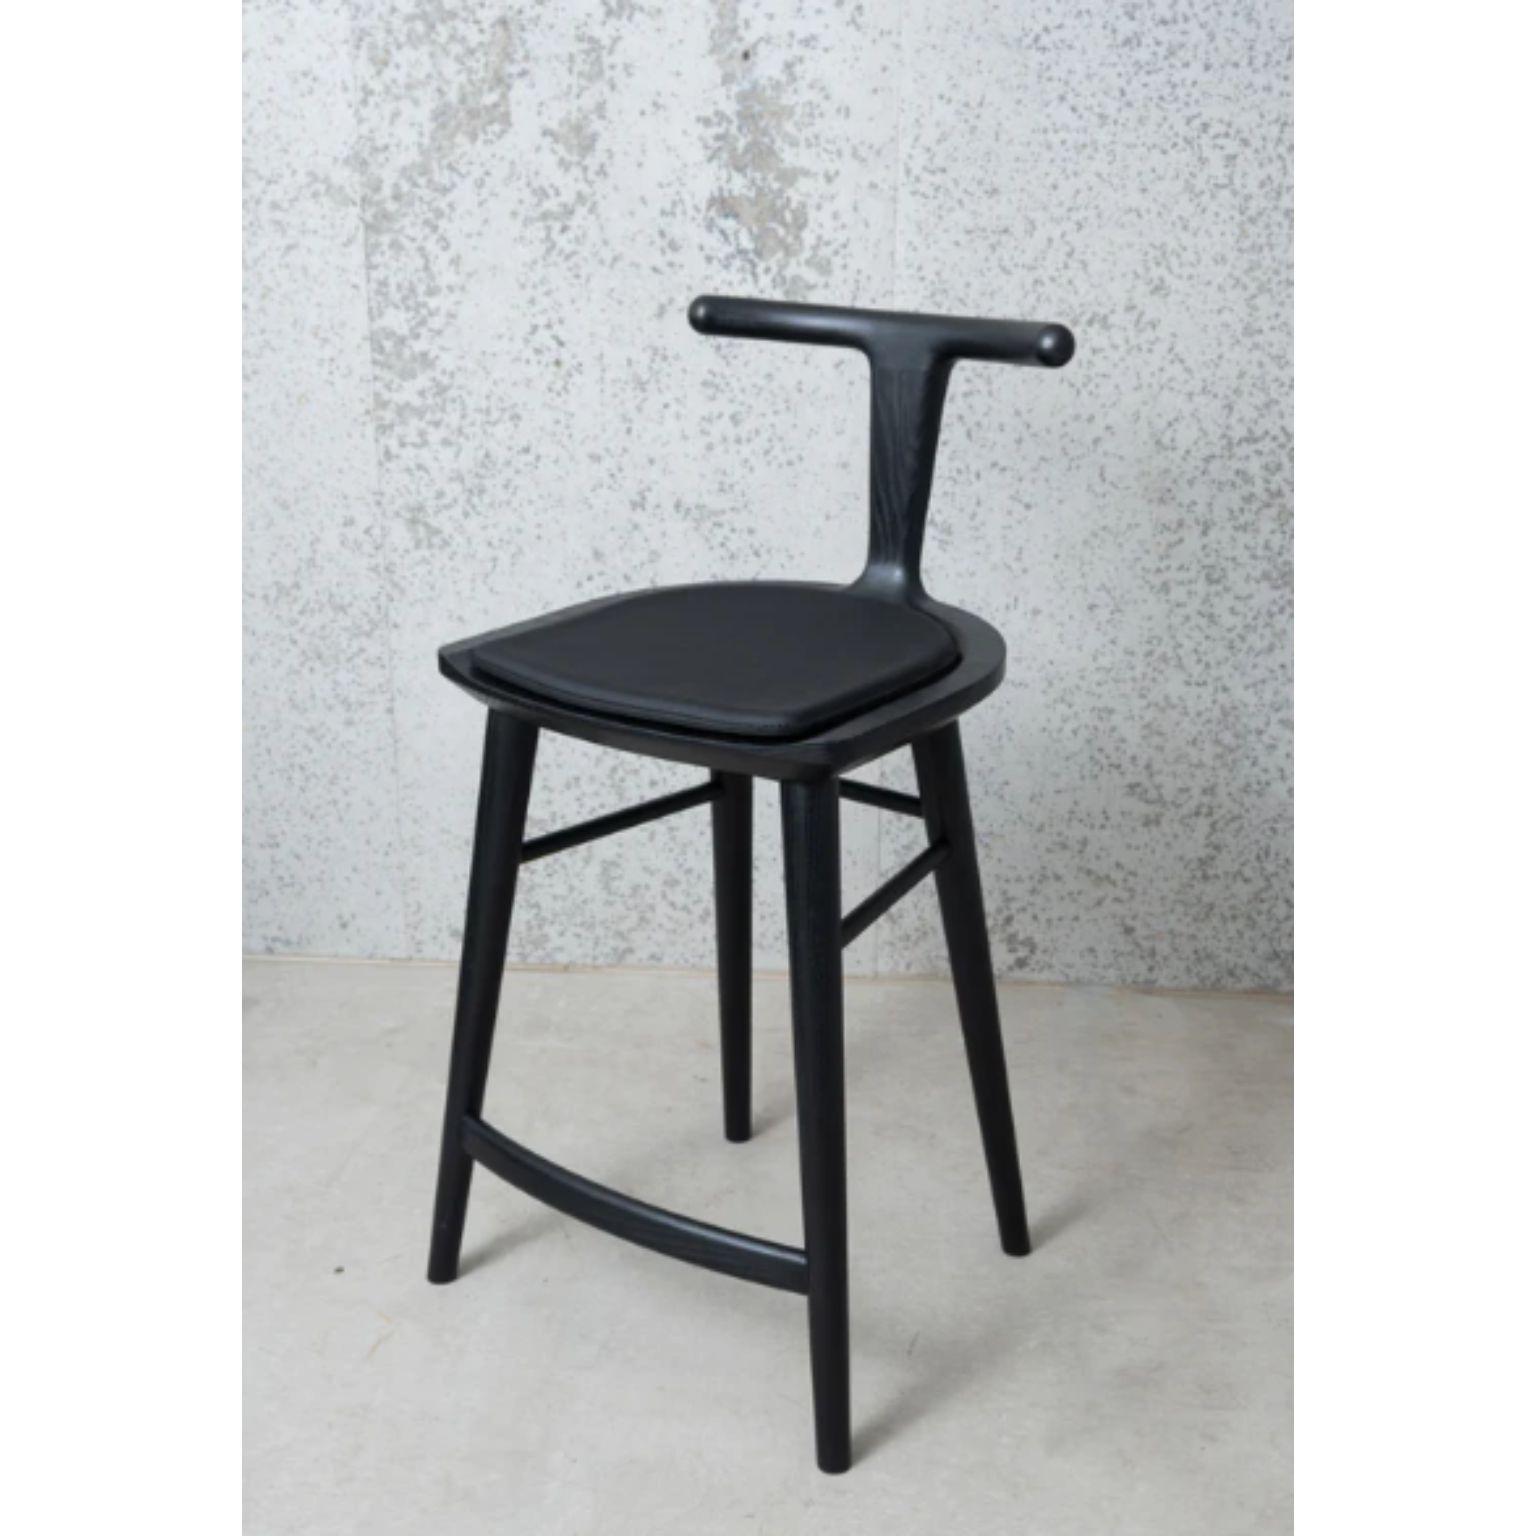 Modern Charcoal Ash Oxbend Stool with Leather Seat Pad by Fernweh Woodworking